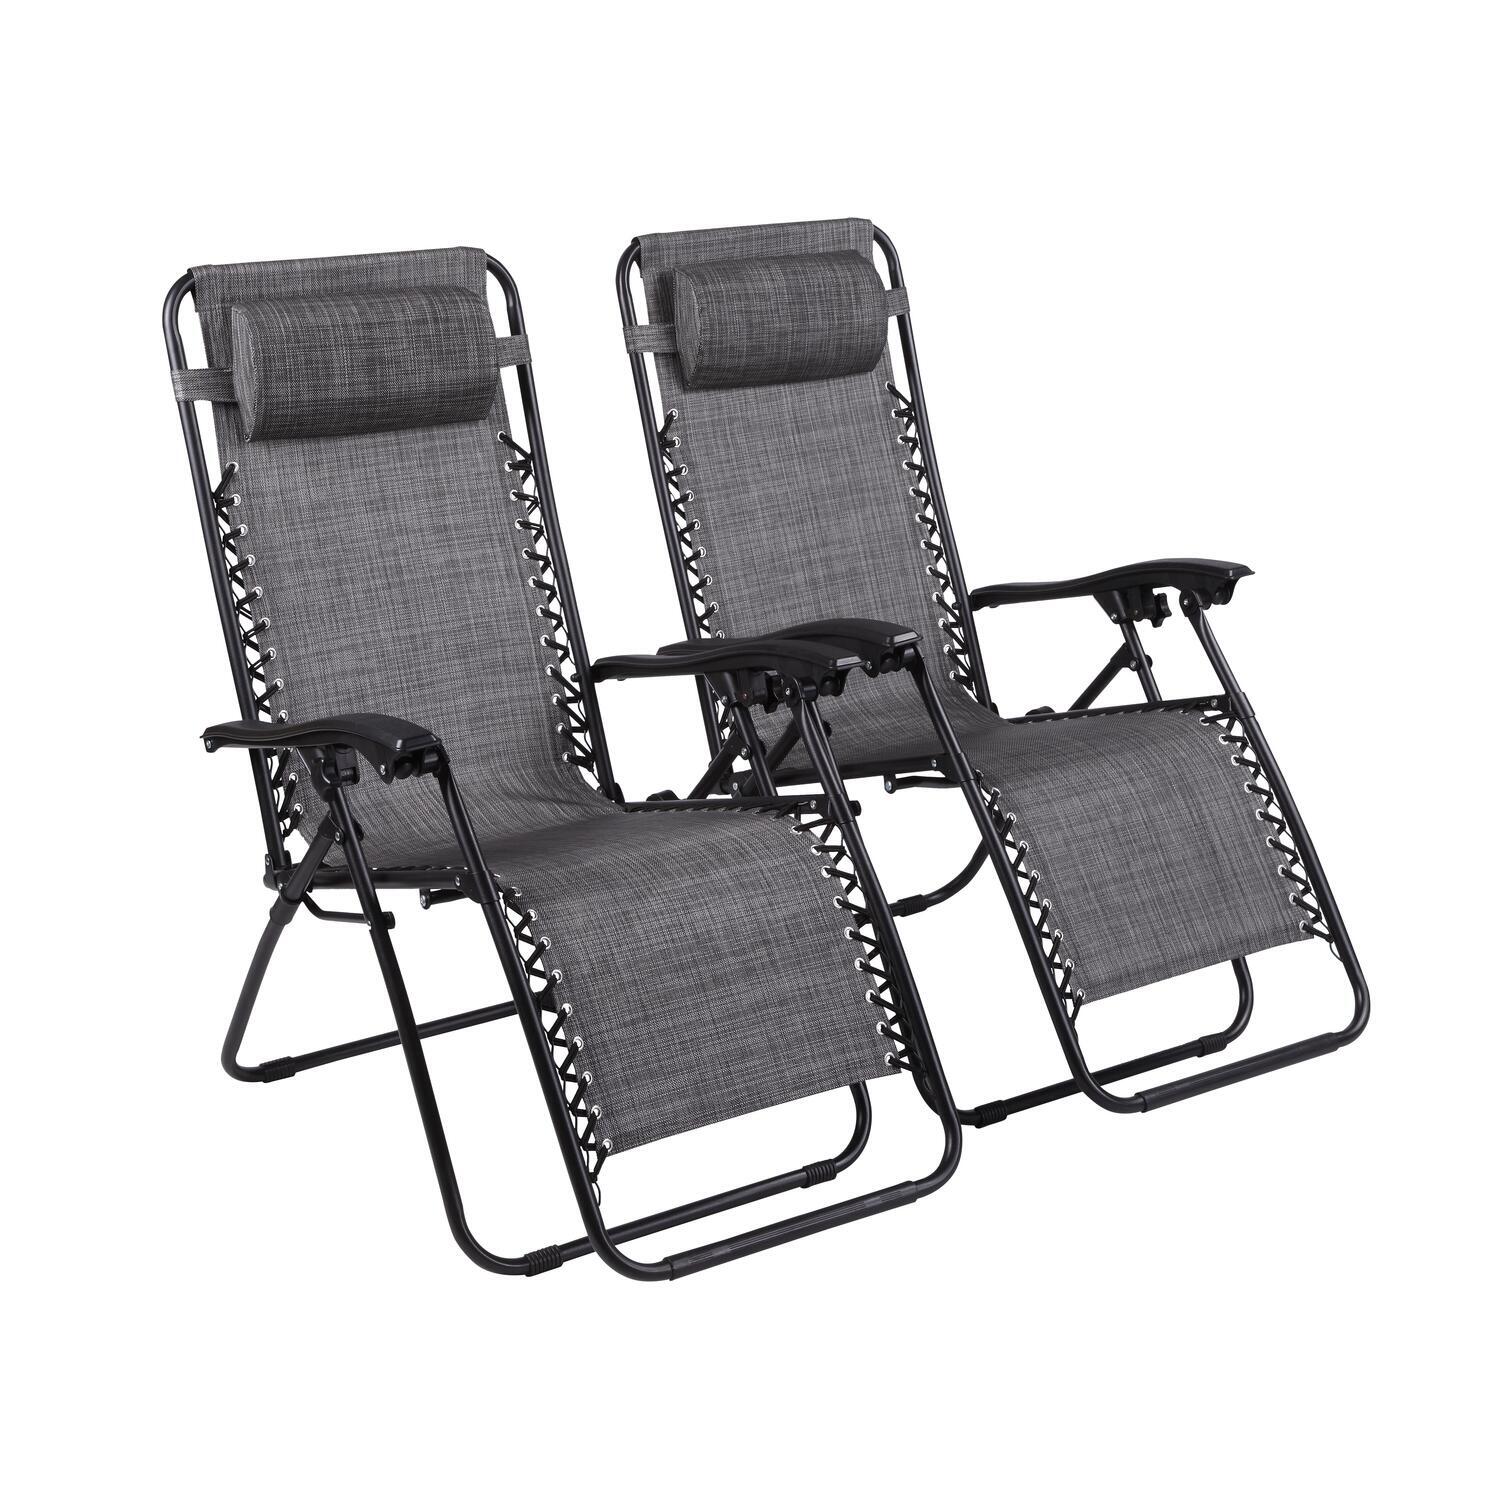 Patio Lounge Chairs Set of 2 Lounge Chairs for Outside Outdoor Lounge Chairs Tanning Chair Folding Lounge Chair Pack of 2 - Color: Gray - image 1 of 6